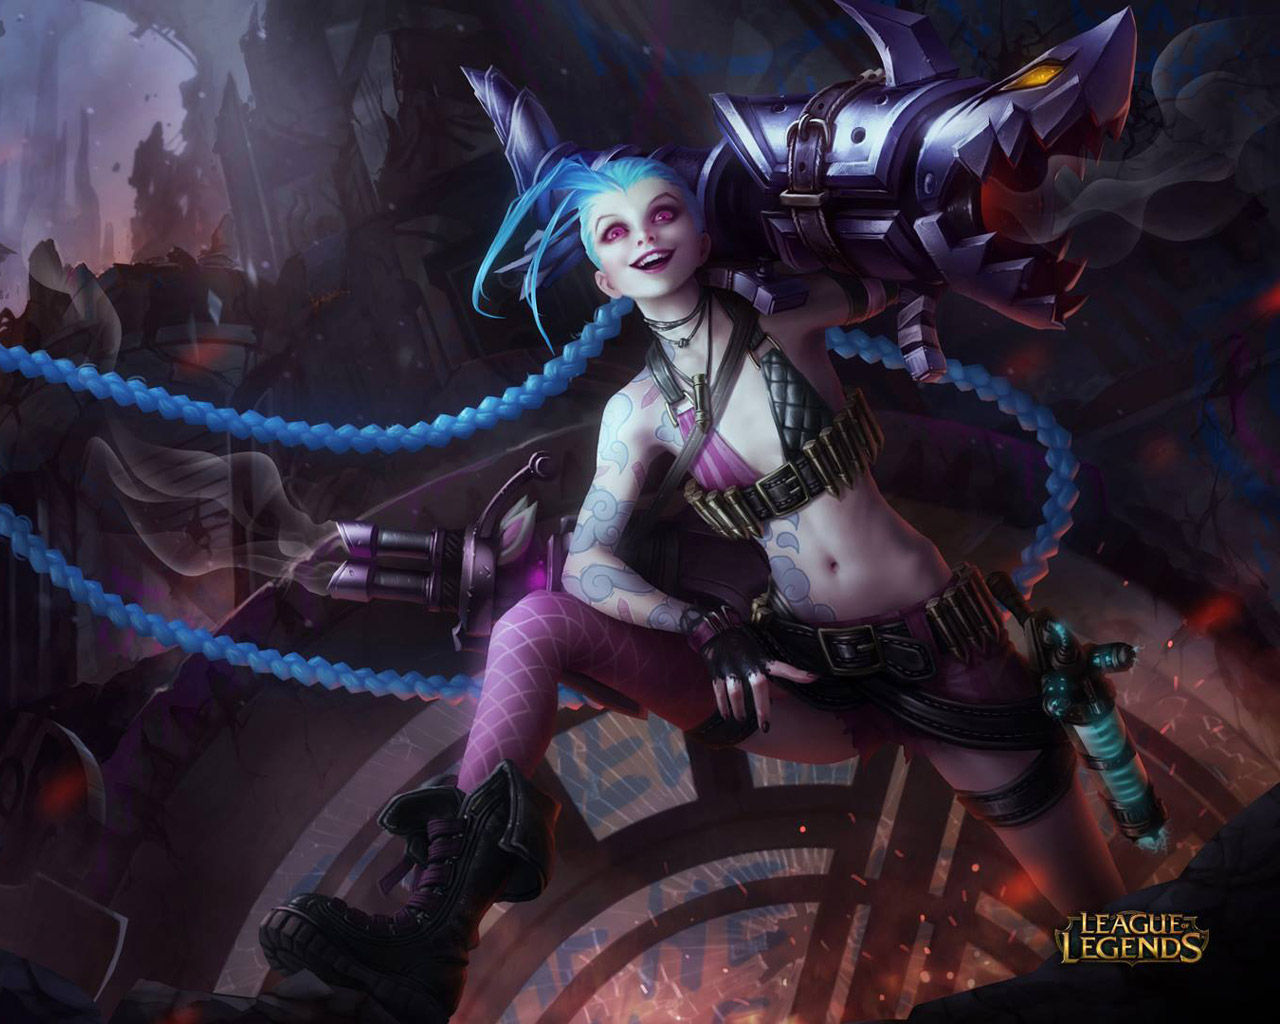 league of legends wallpaper 1280x1024,action adventure game,cg artwork,darkness,adventure game,fictional character